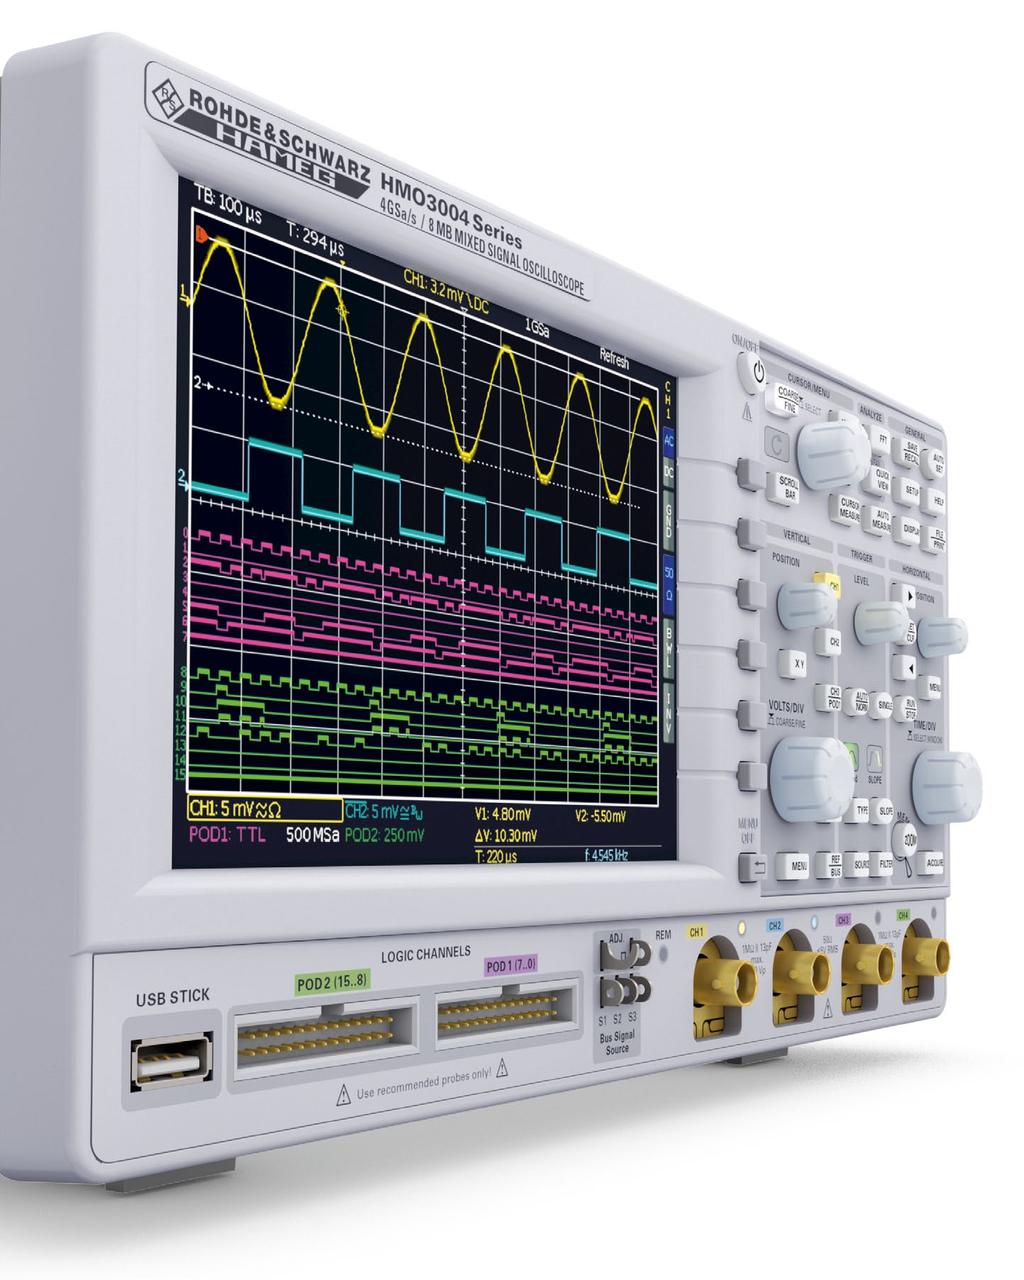 HMO 3000 SERIES Precise Signal Analysis An excellent sampling rate in combination with a large memory depth is the key for precise signal analysis.